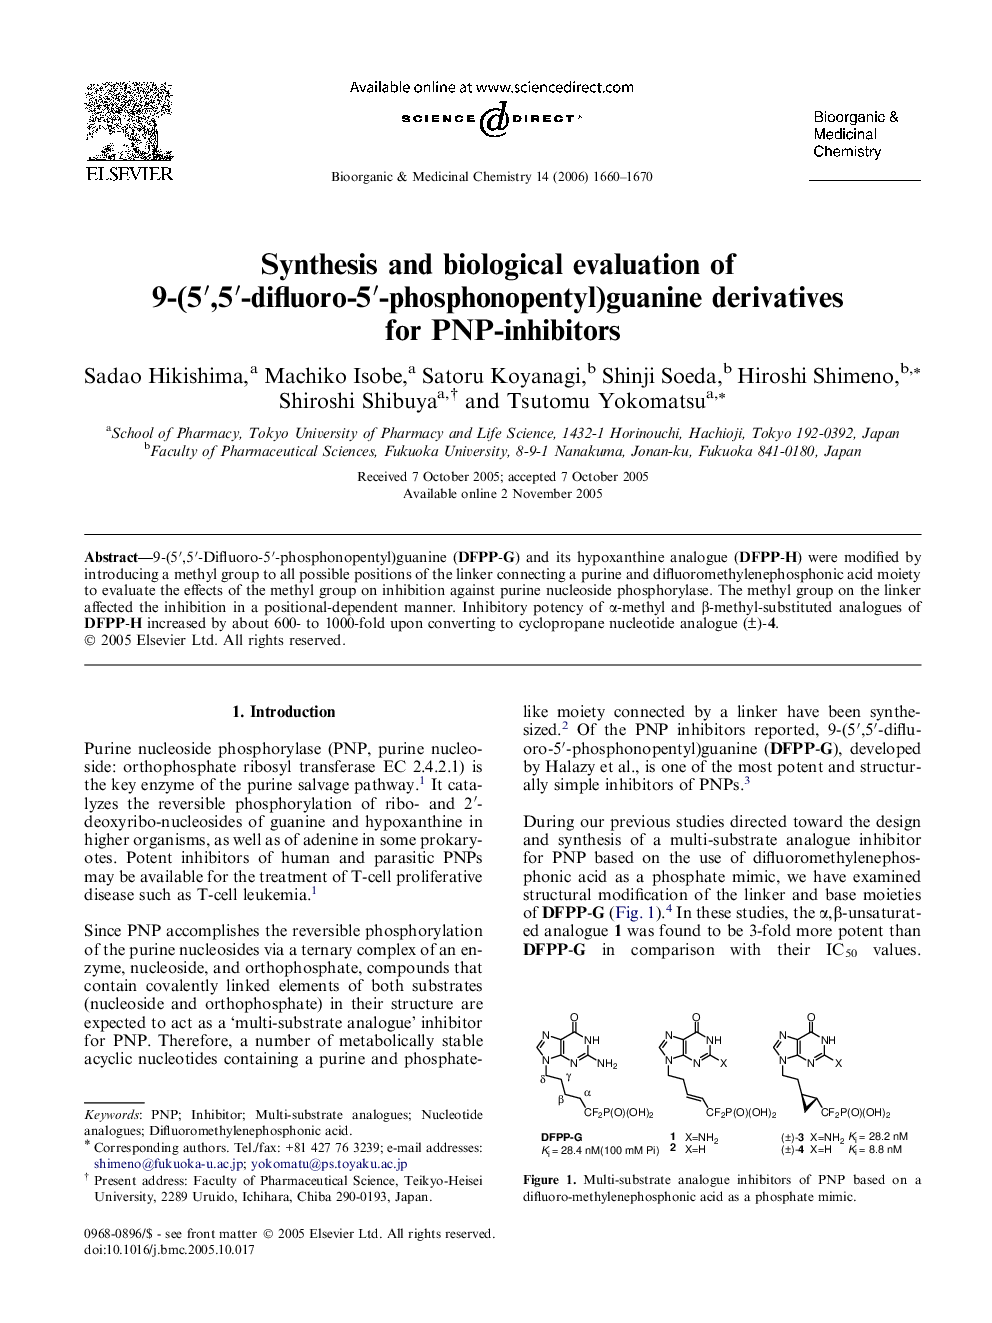 Synthesis and biological evaluation of 9-(5′,5′-difluoro-5′-phosphonopentyl)guanine derivatives for PNP-inhibitors